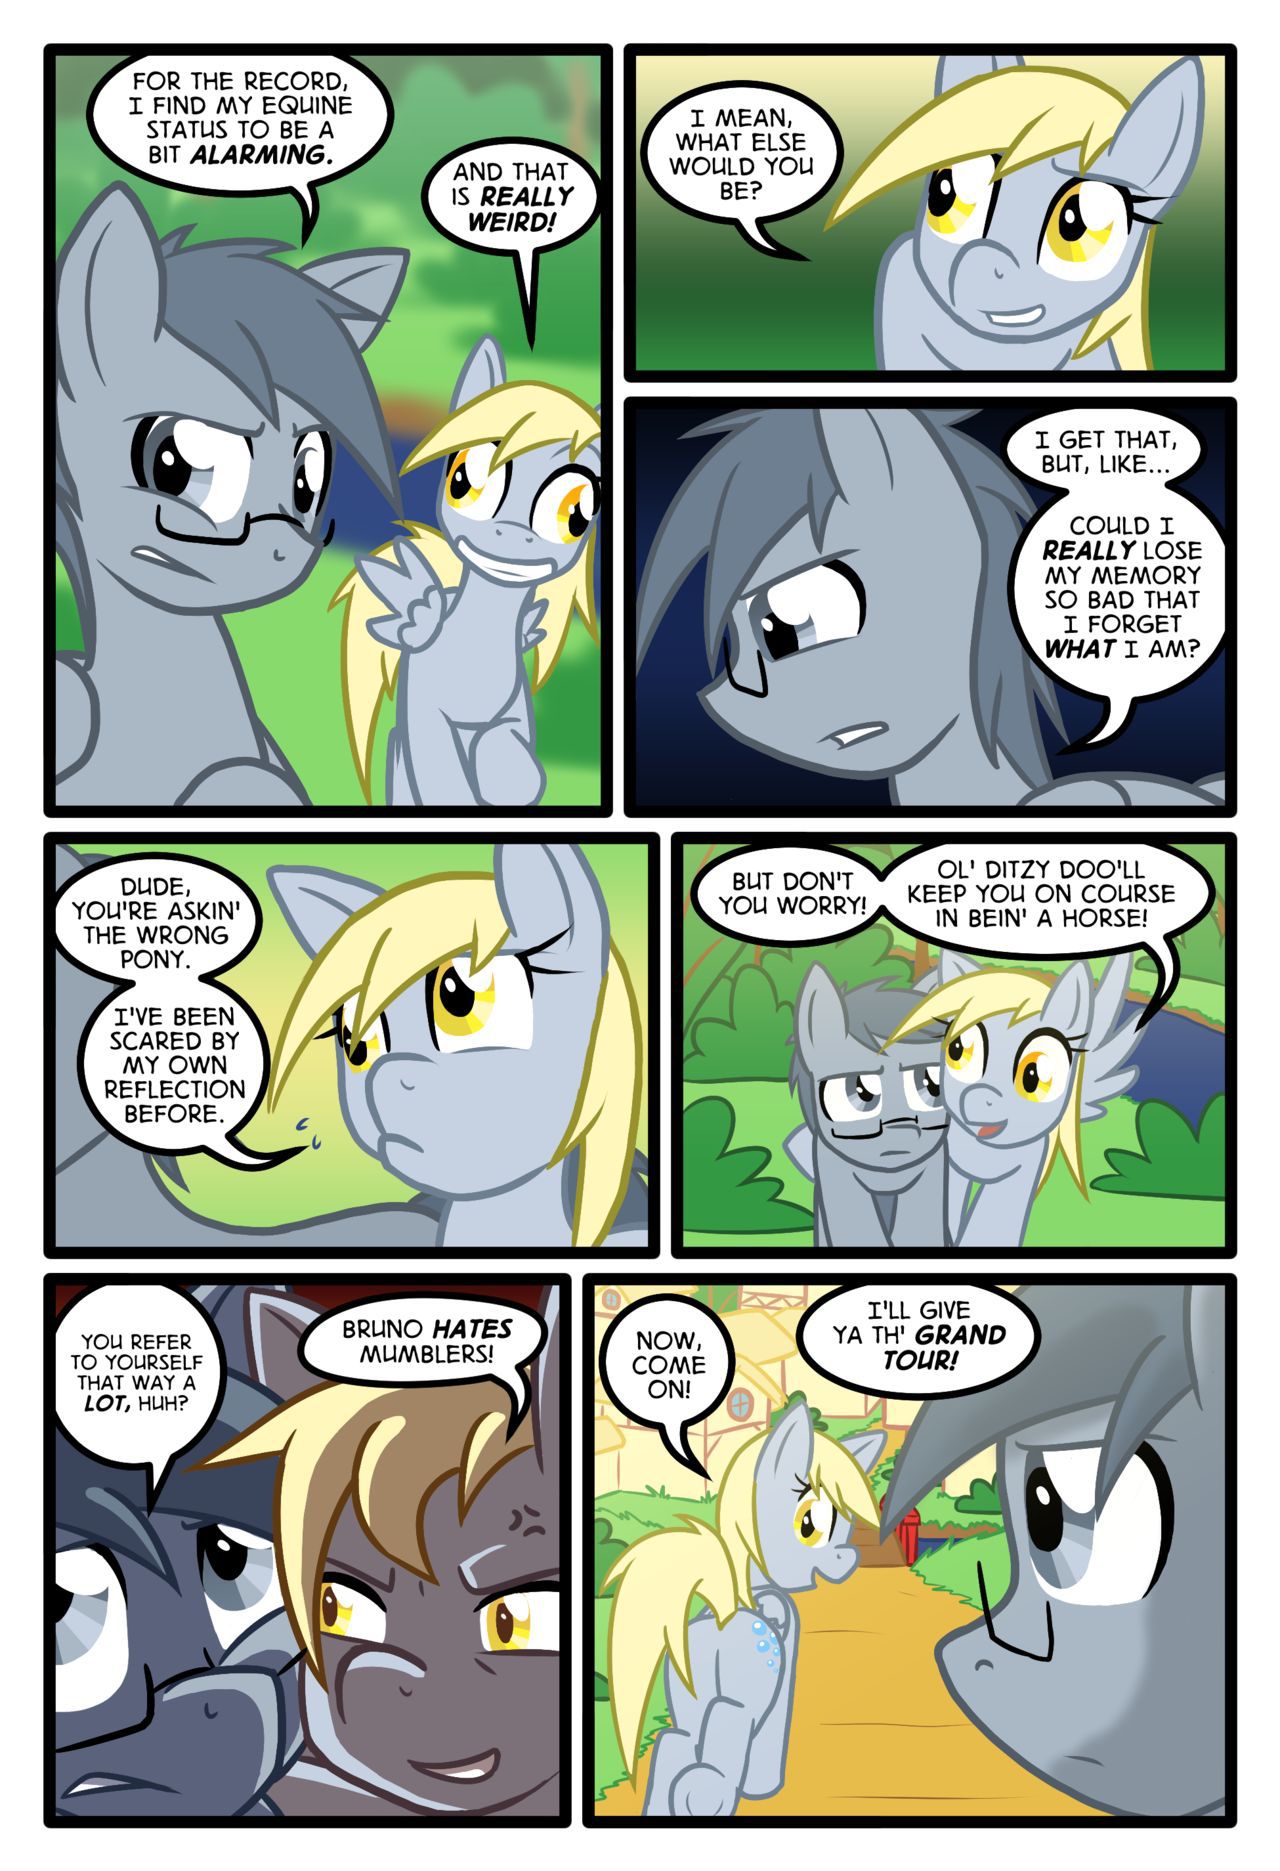 [Zaron] Lonely Hooves (My Little Pony Friendship Is Magic) [Ongoing] 11